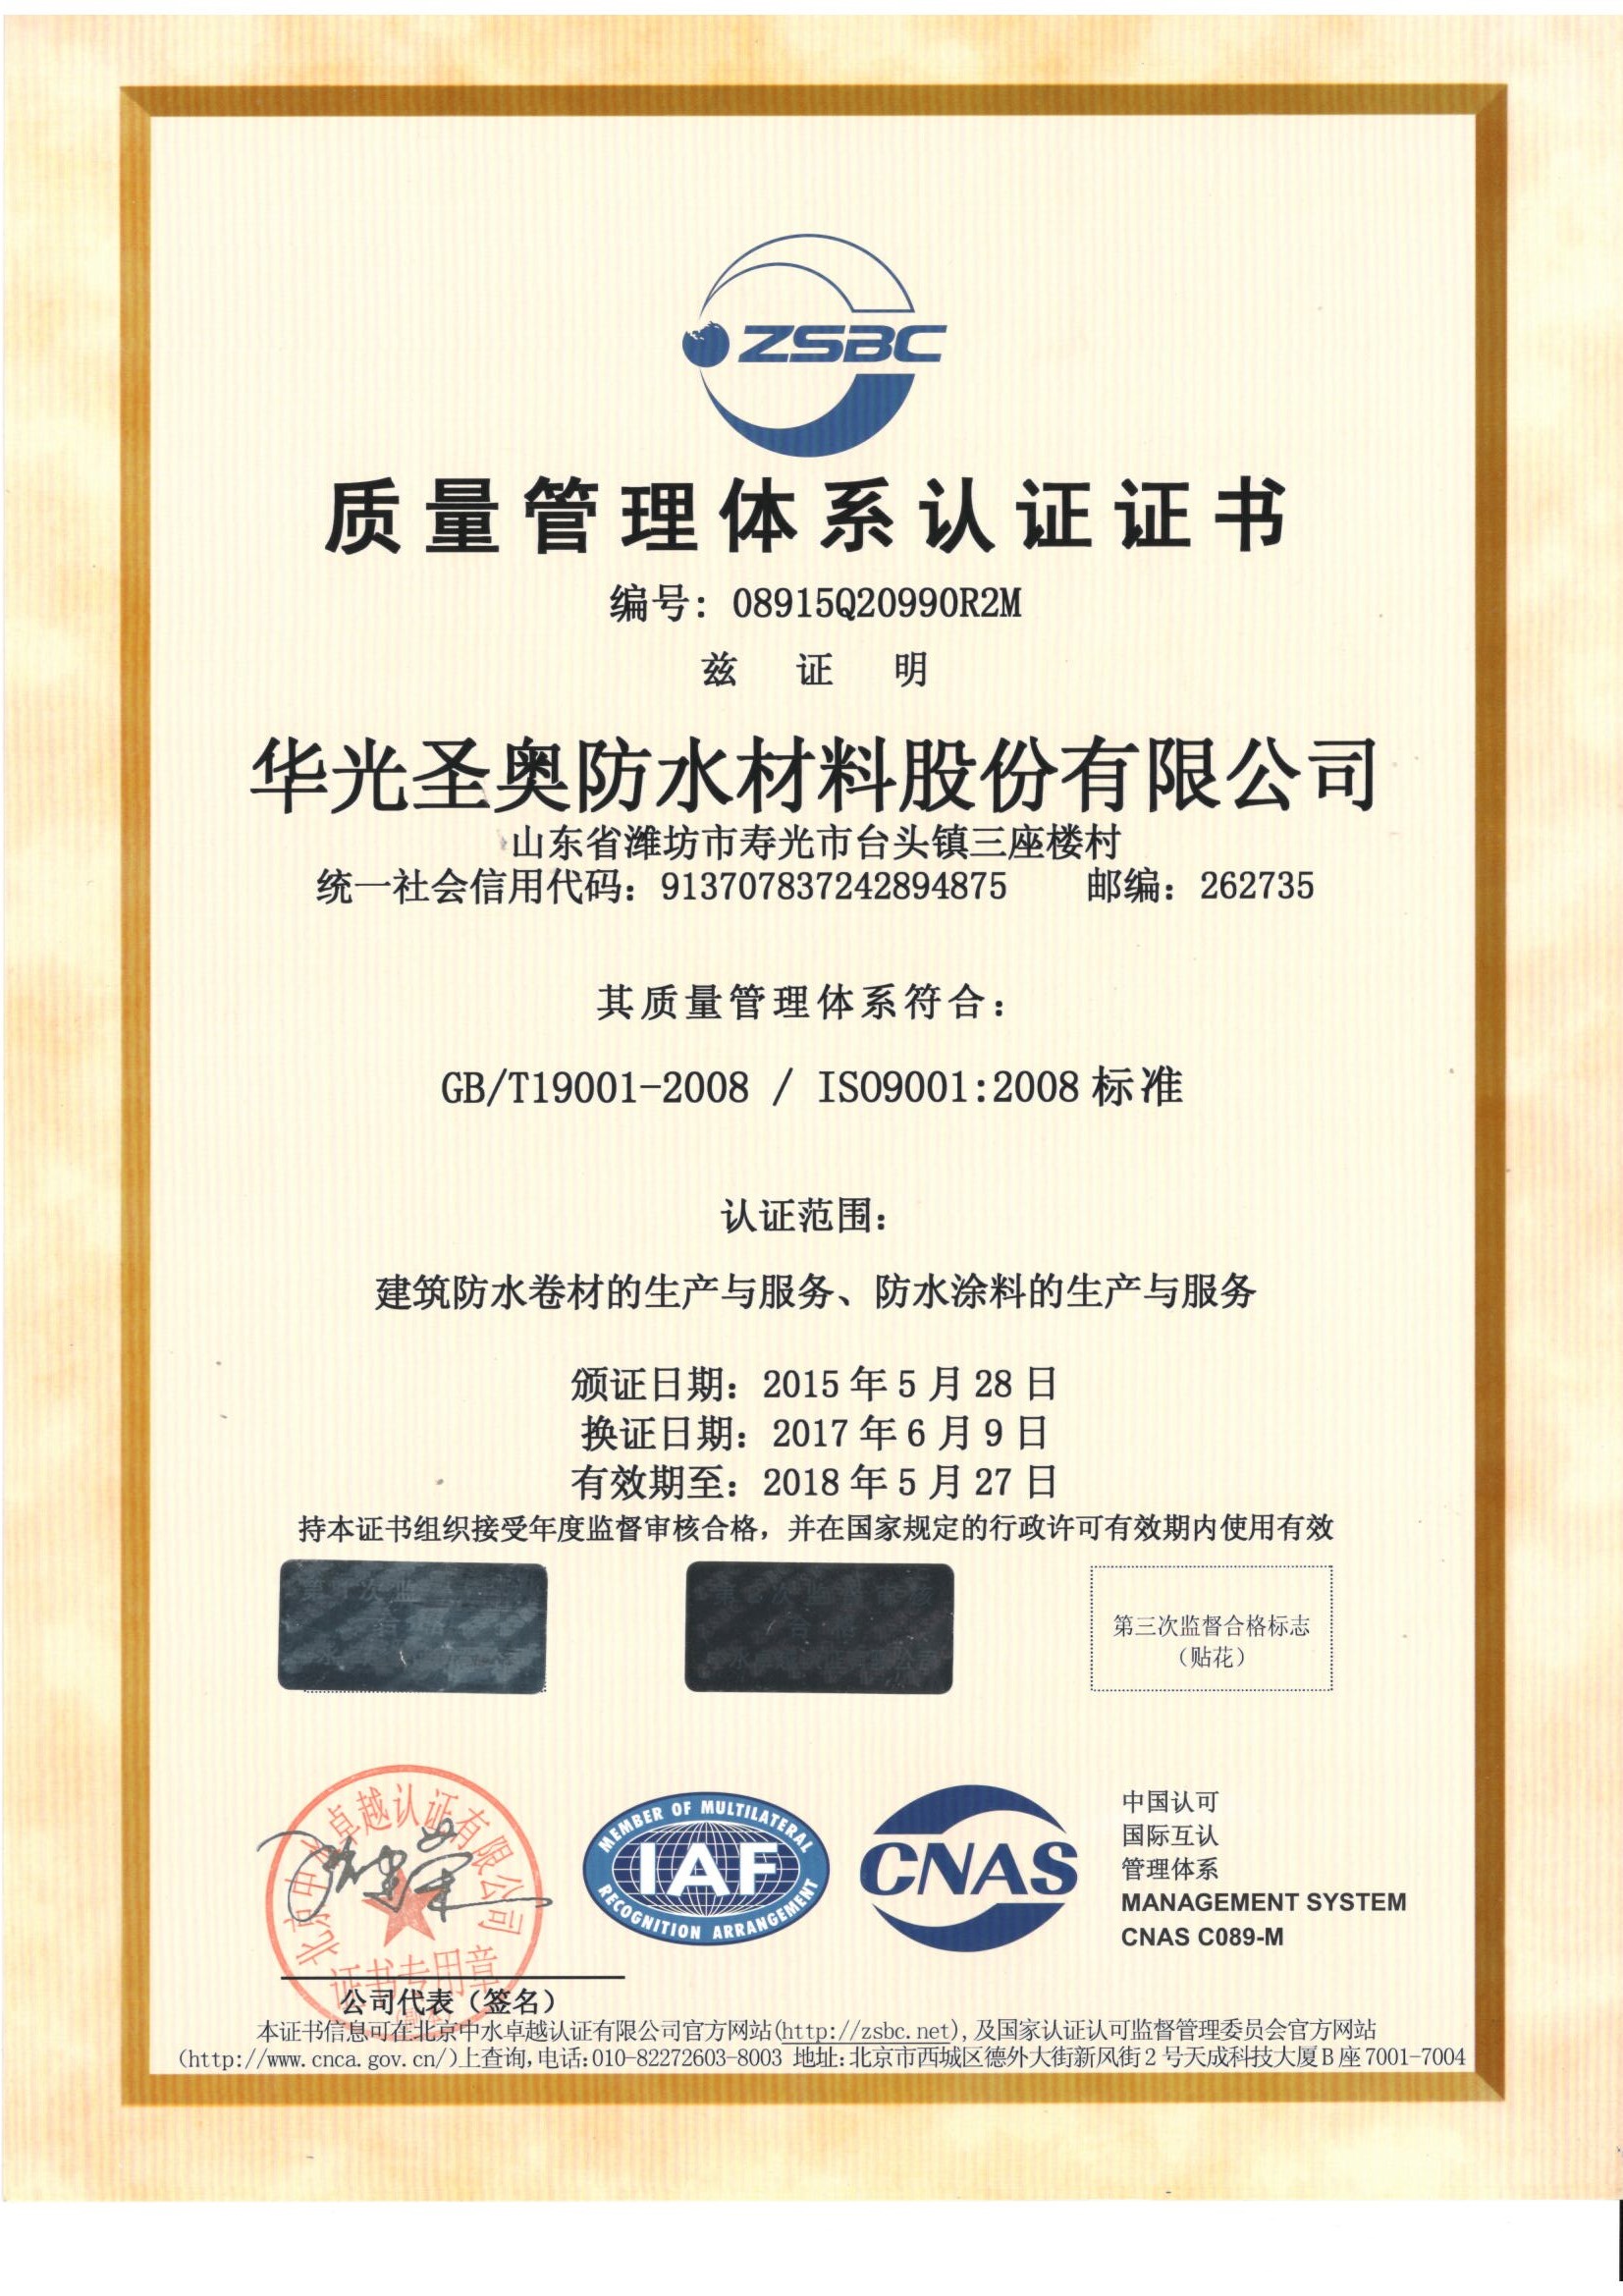 9000 certification - Chinese version